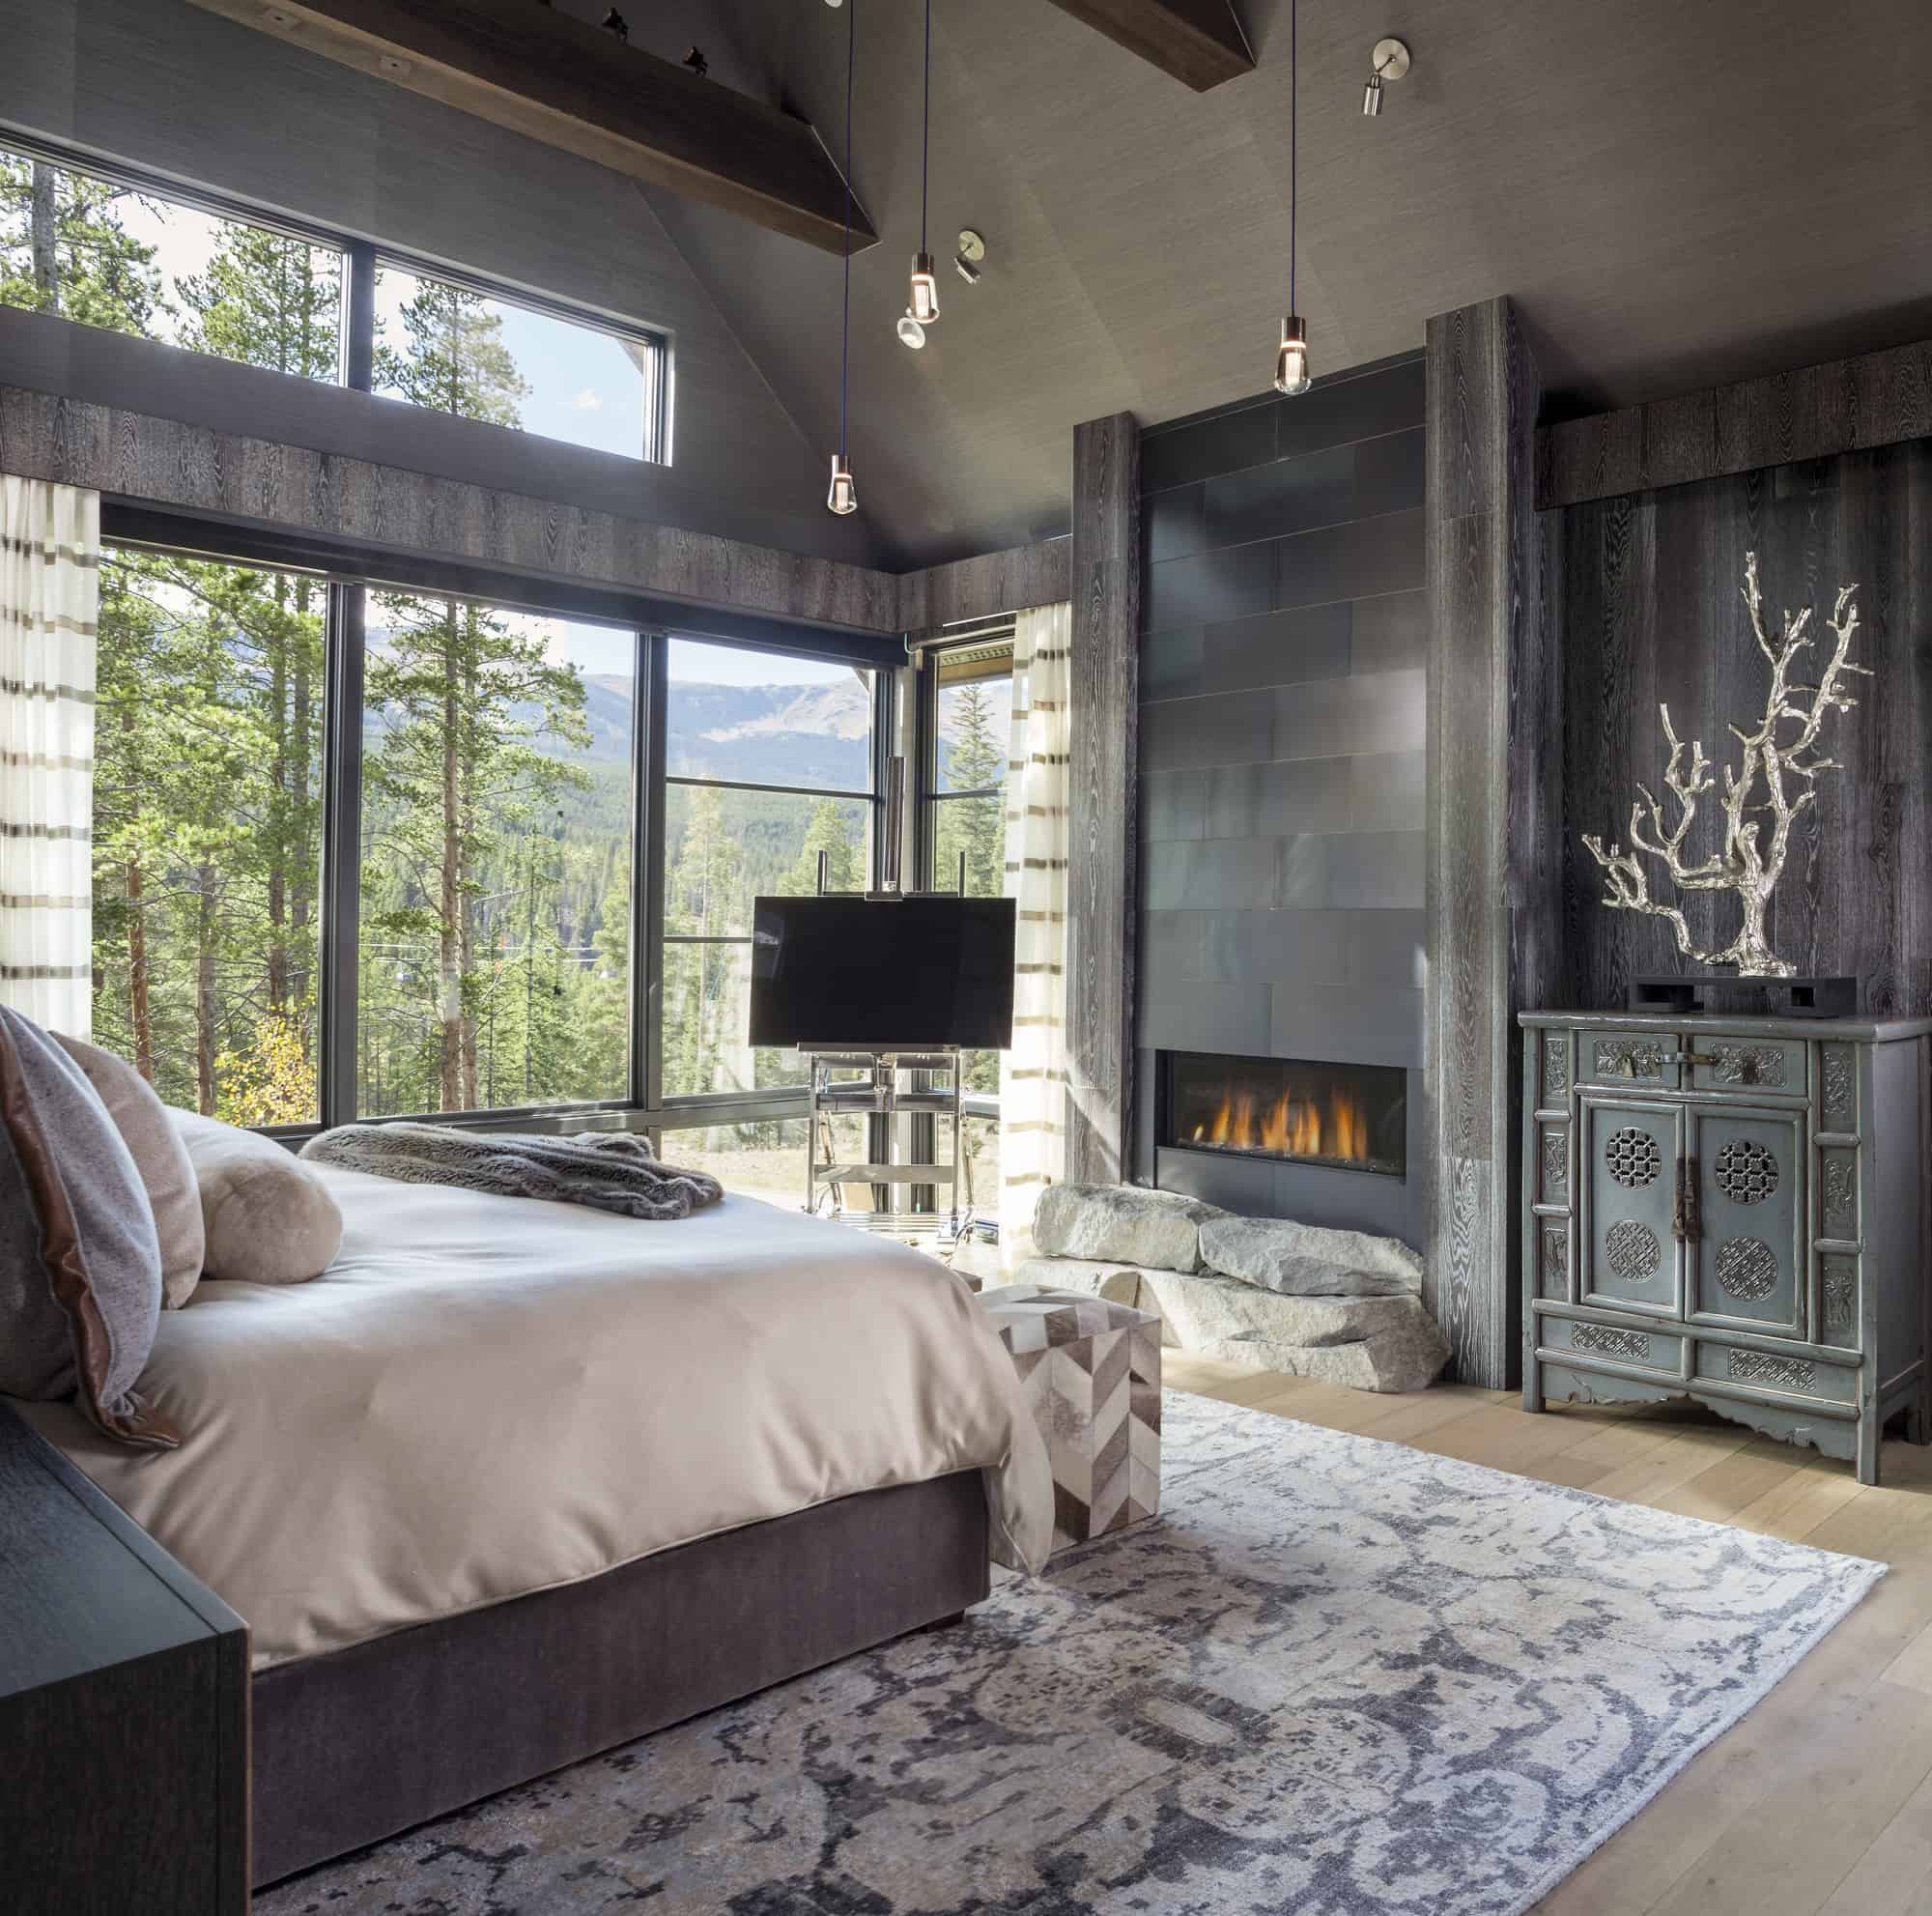 Gorgeous fireplace in moody master bedroom colorado interior design